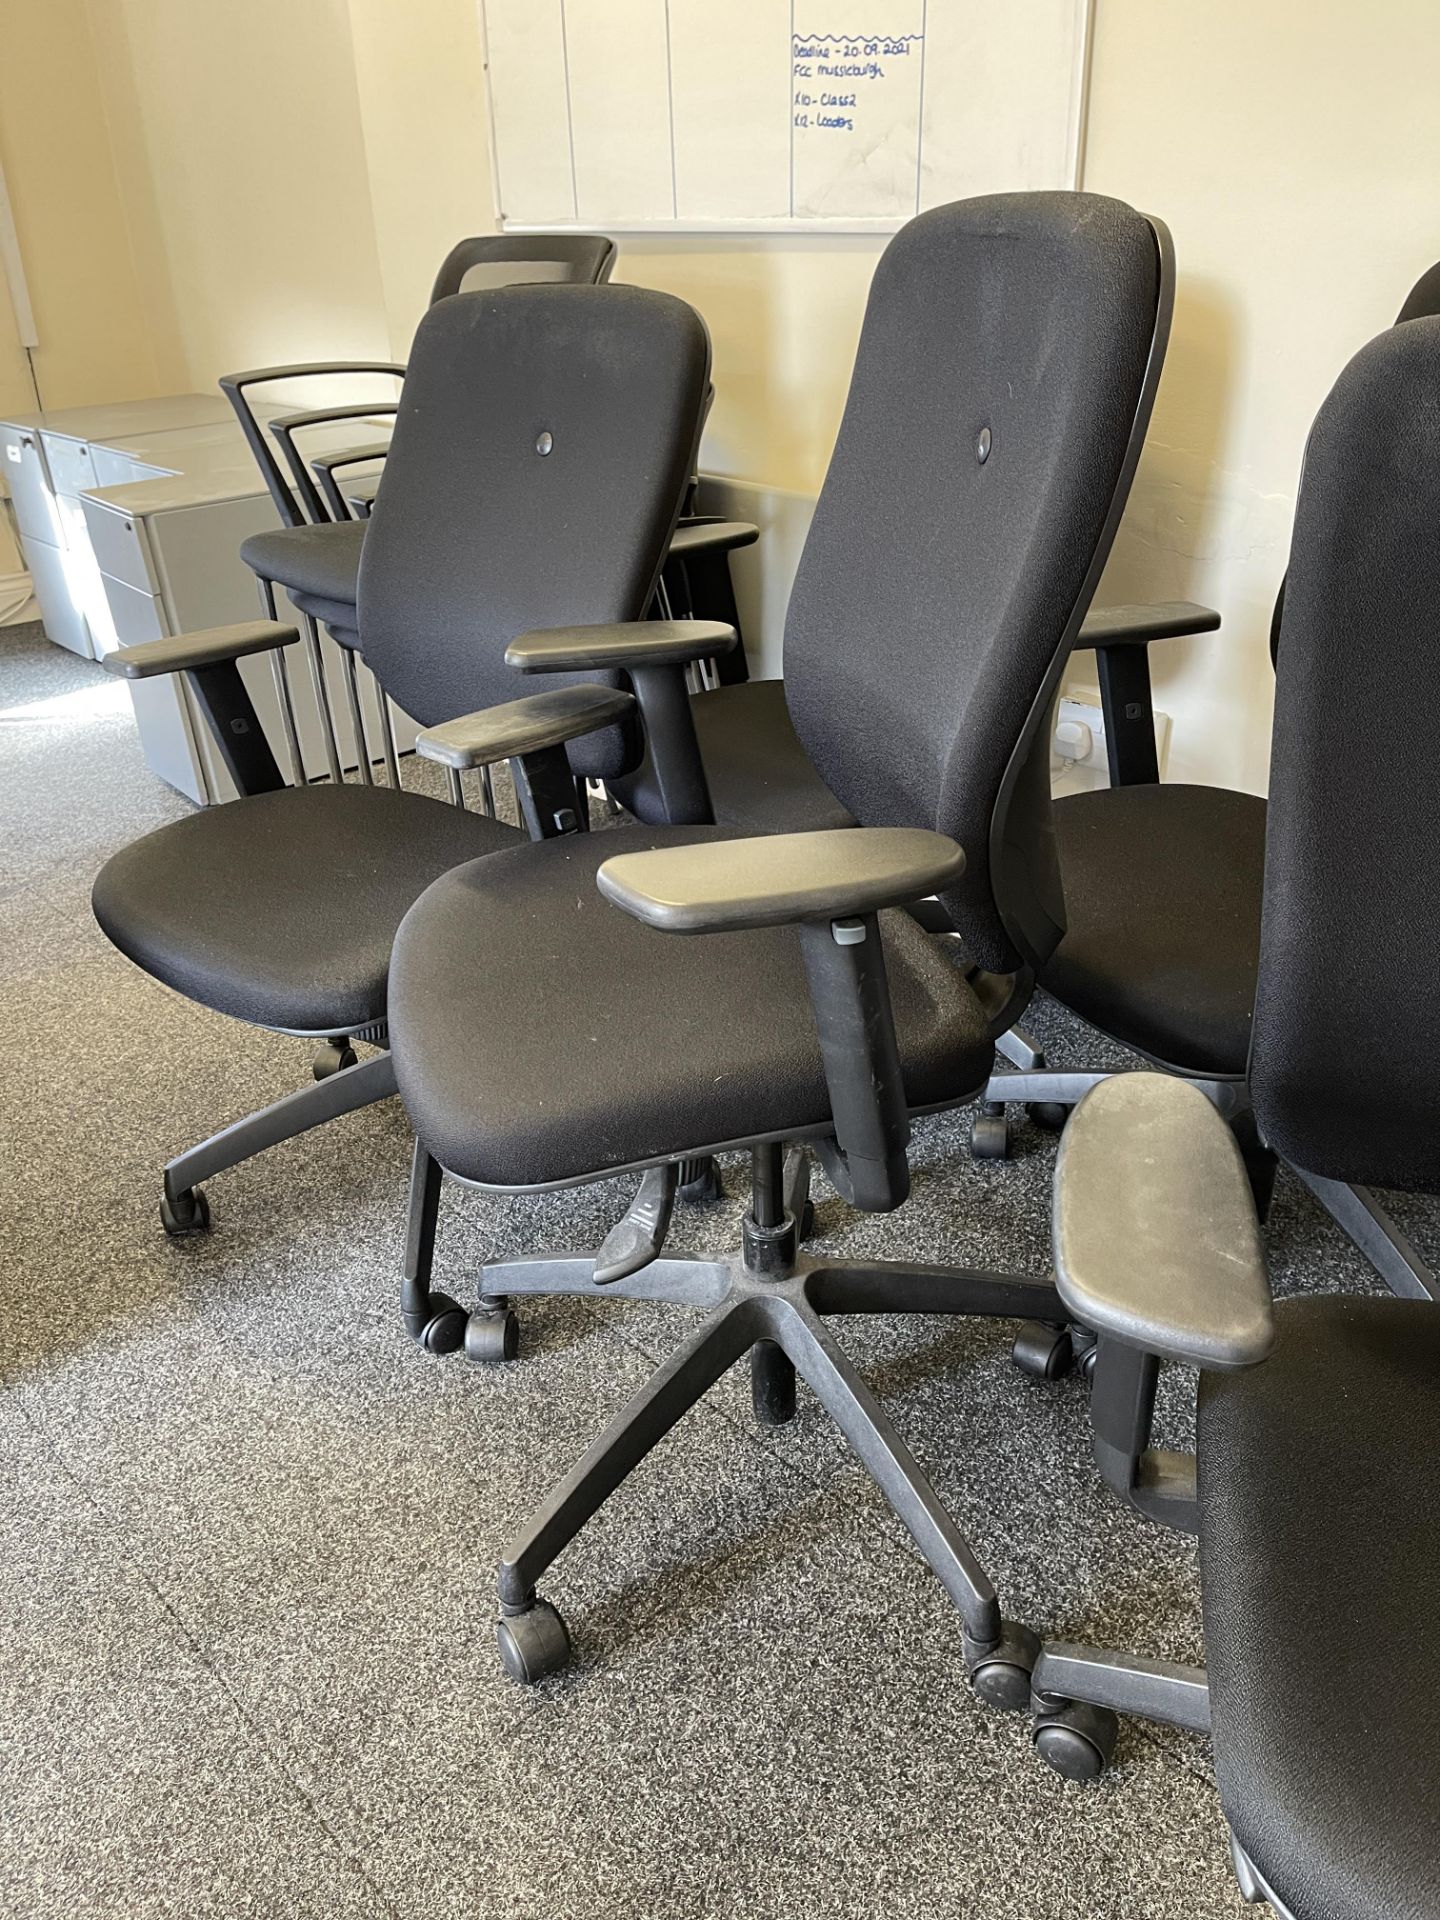 7: Cloth Upholstered Swivel Base Operator Chairs with pneumatic up/down adjustment - Image 3 of 4